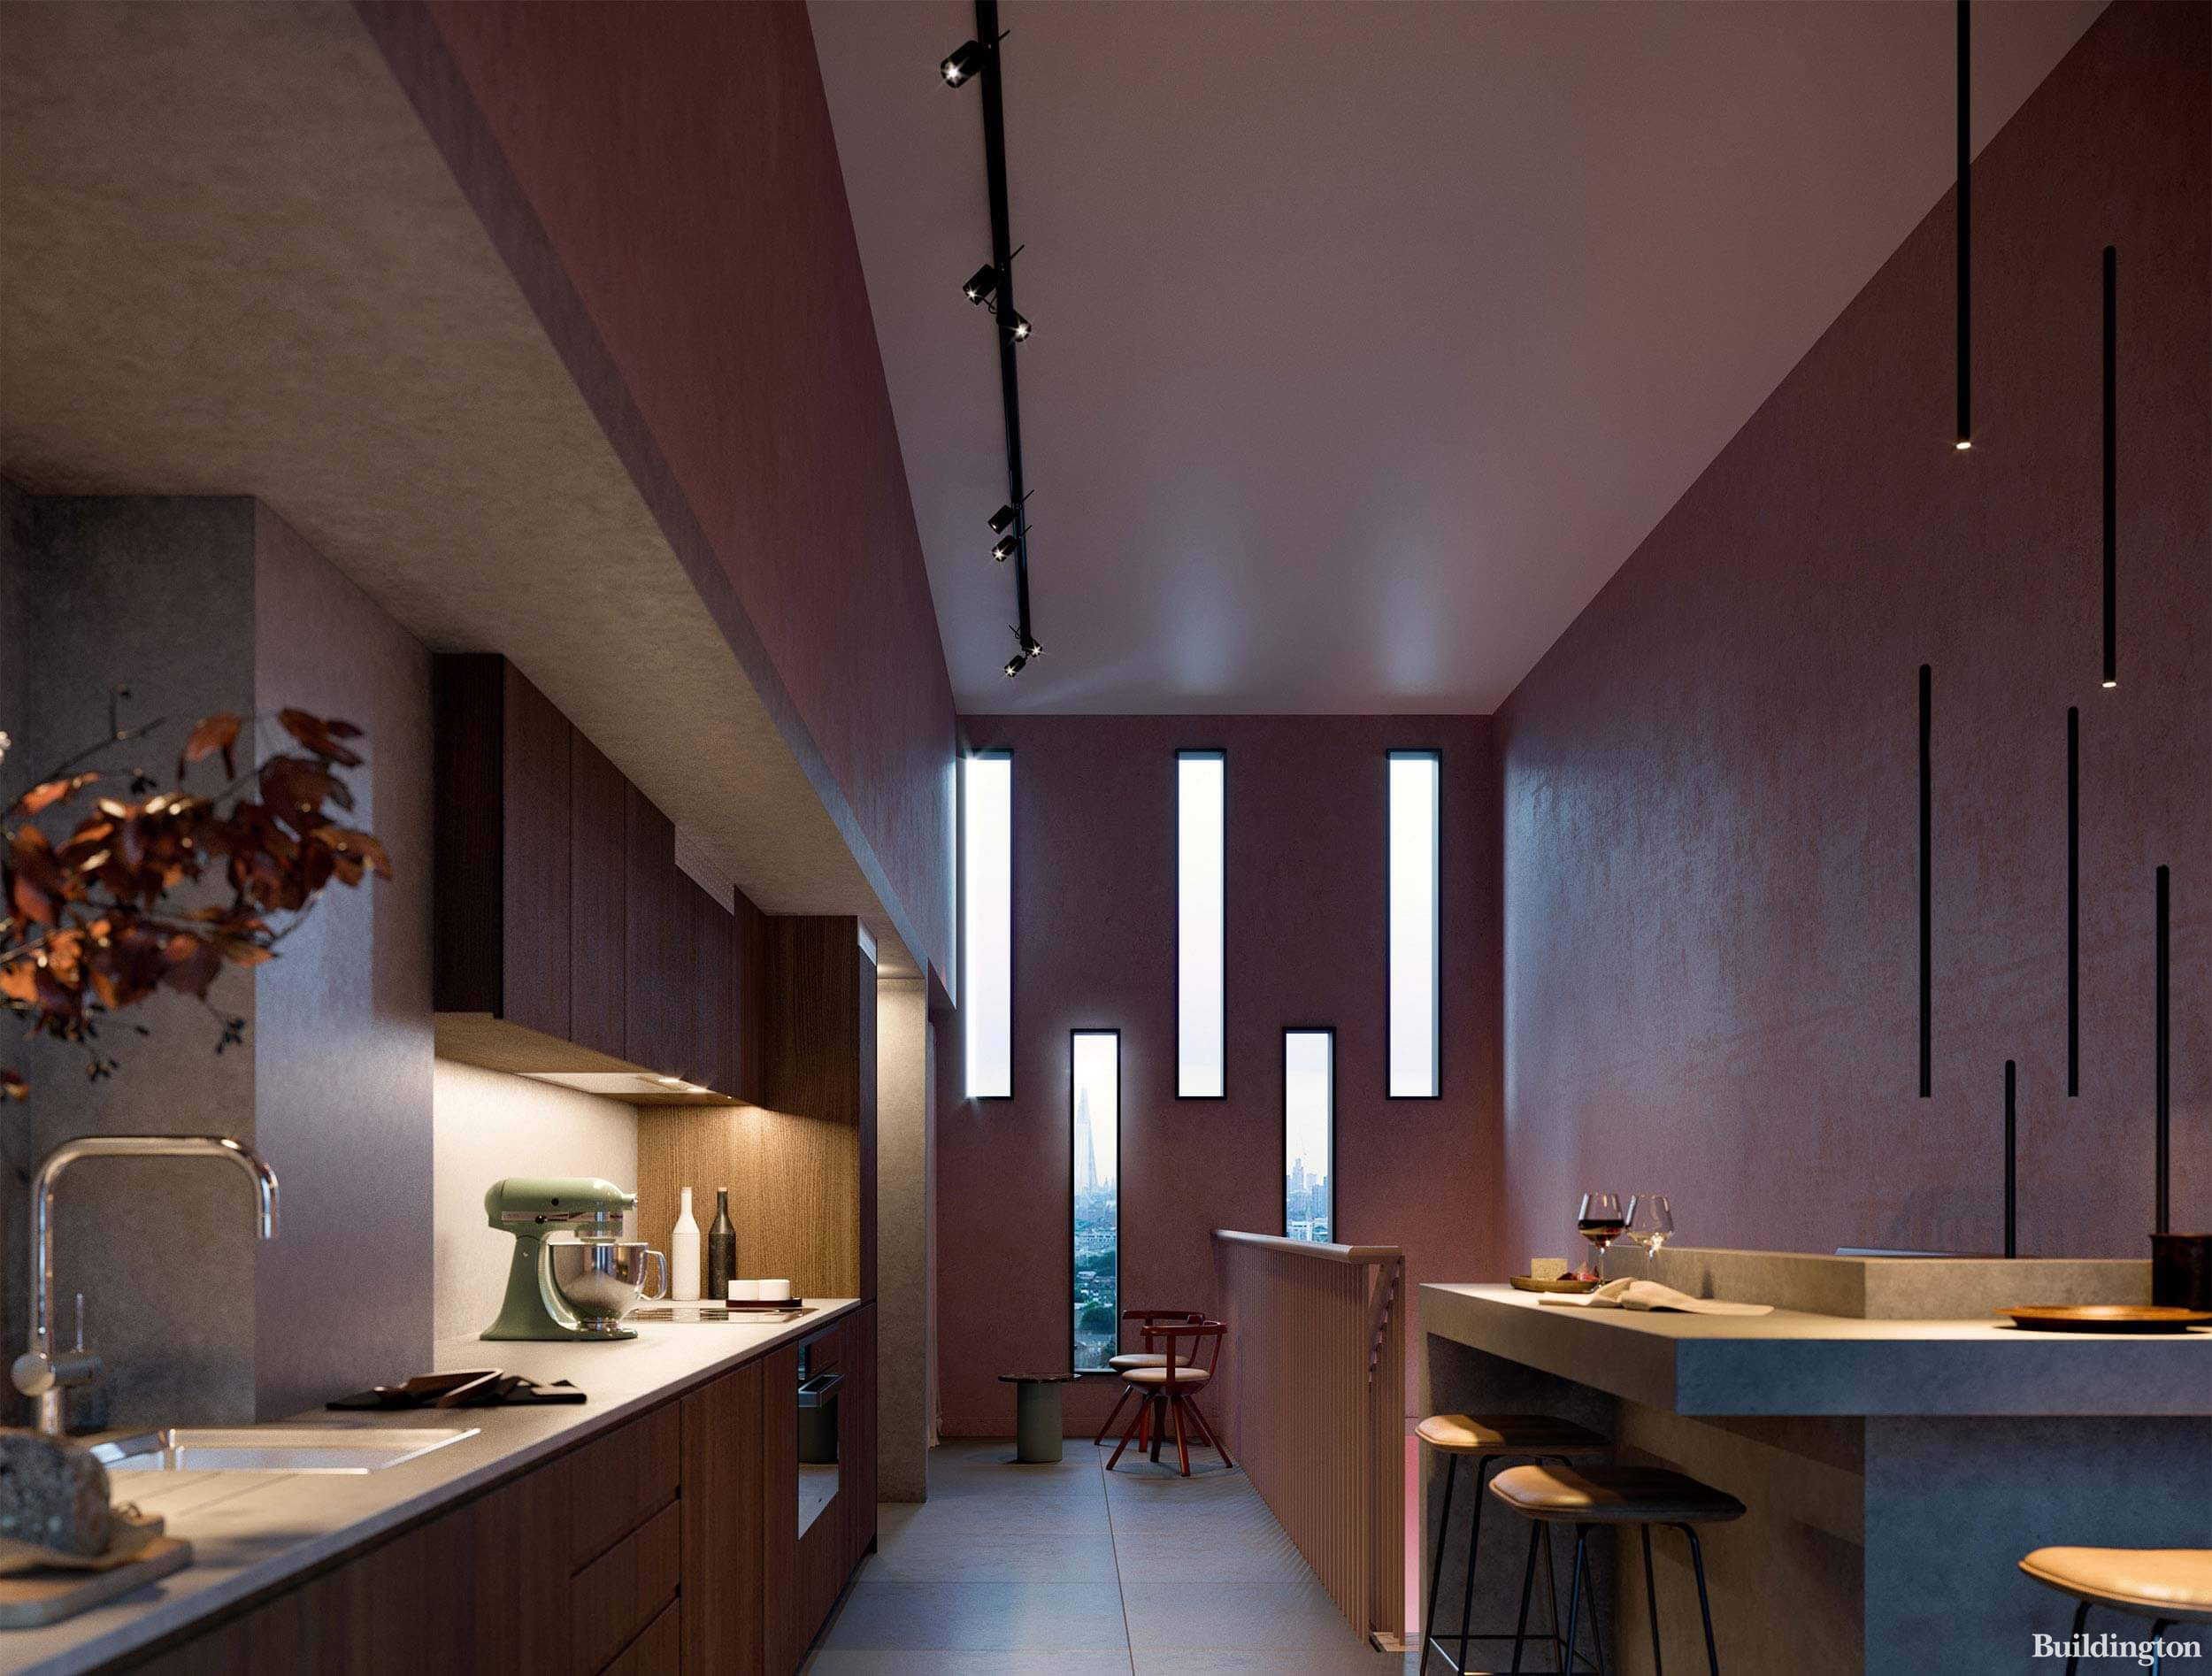 Interiors at Balfron Tower have been designed by Studio Egret West. CGI of the kitchen in one of the apartments in the tower.